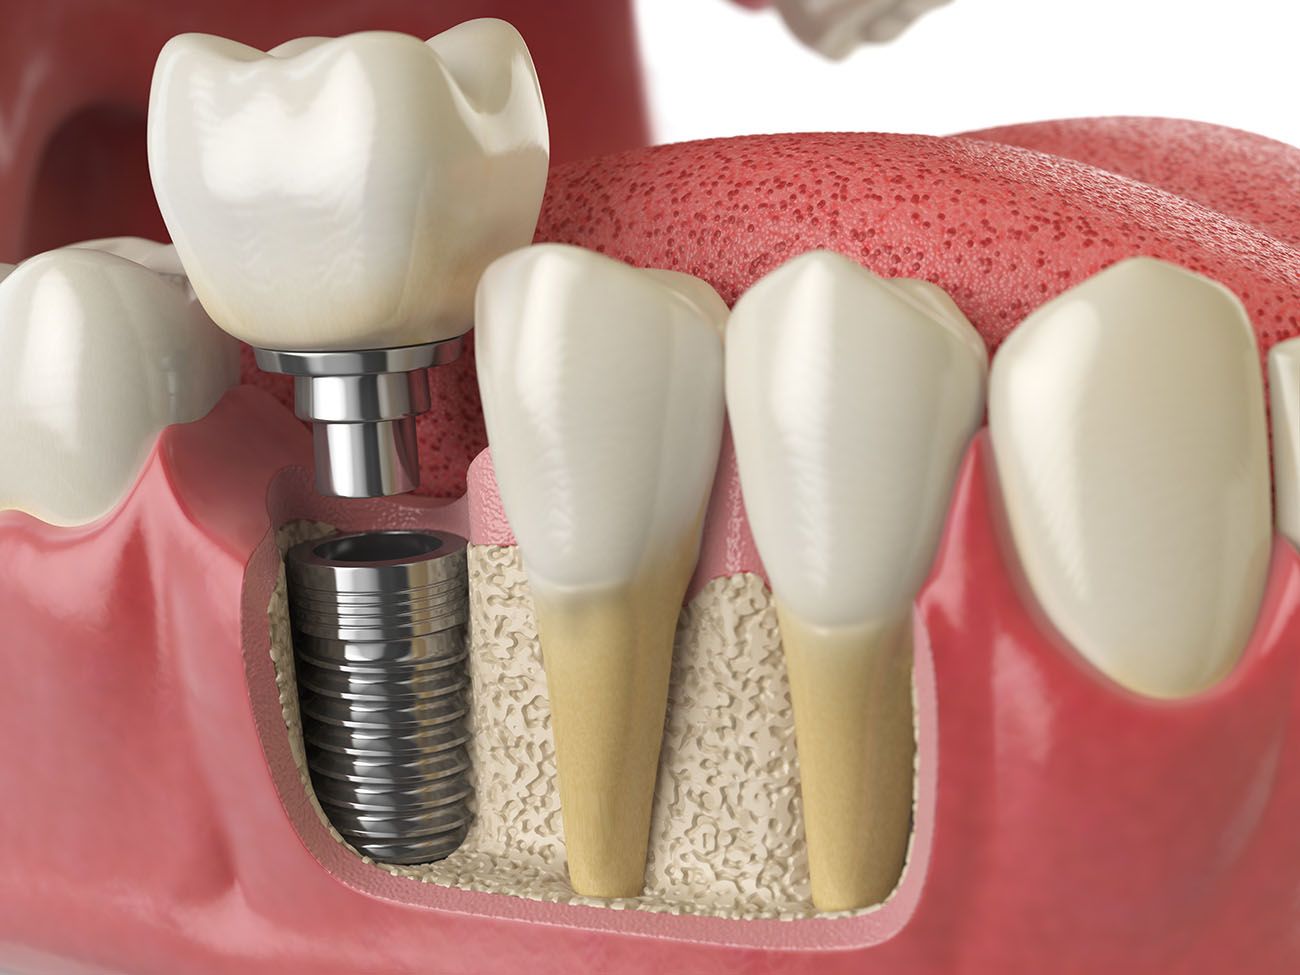 single dental implant replaces missing tooth